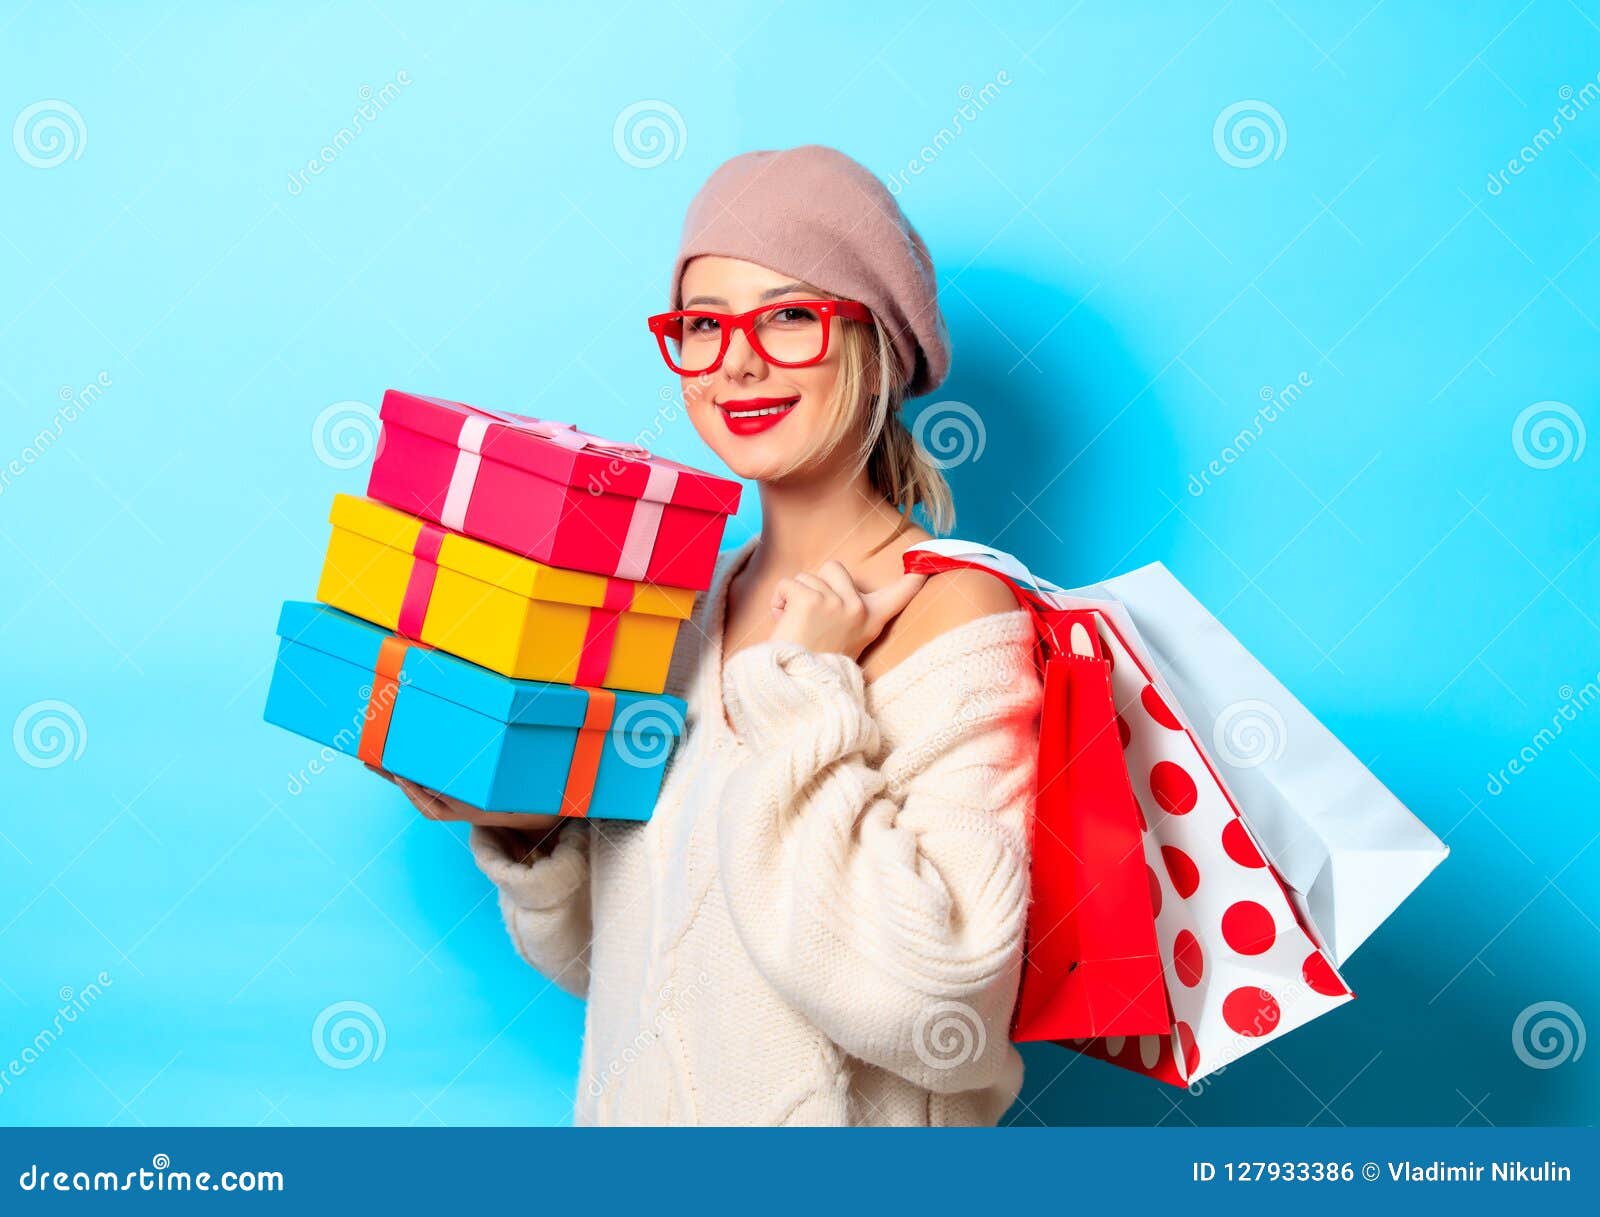 Girl with Gift Boxes and Shopping Bags Stock Photo photo